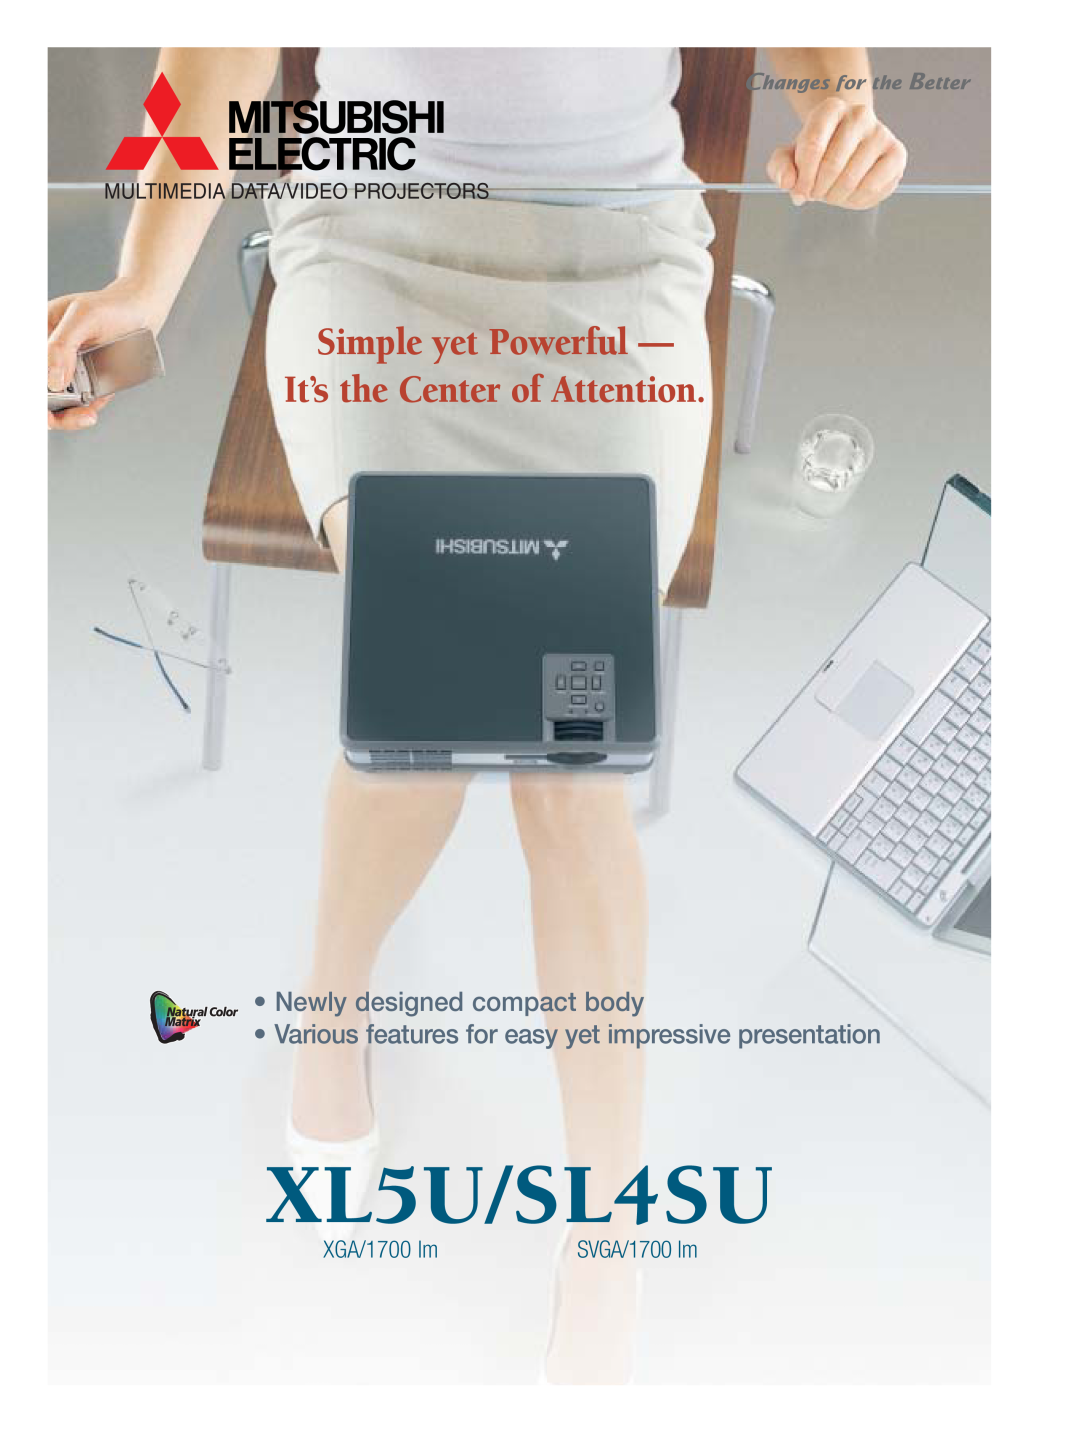 Mitsubishi Electronics manual XL5U/SL4SU, Simple yet Powerful It’s the Center of Attention, Newly designed compact body 